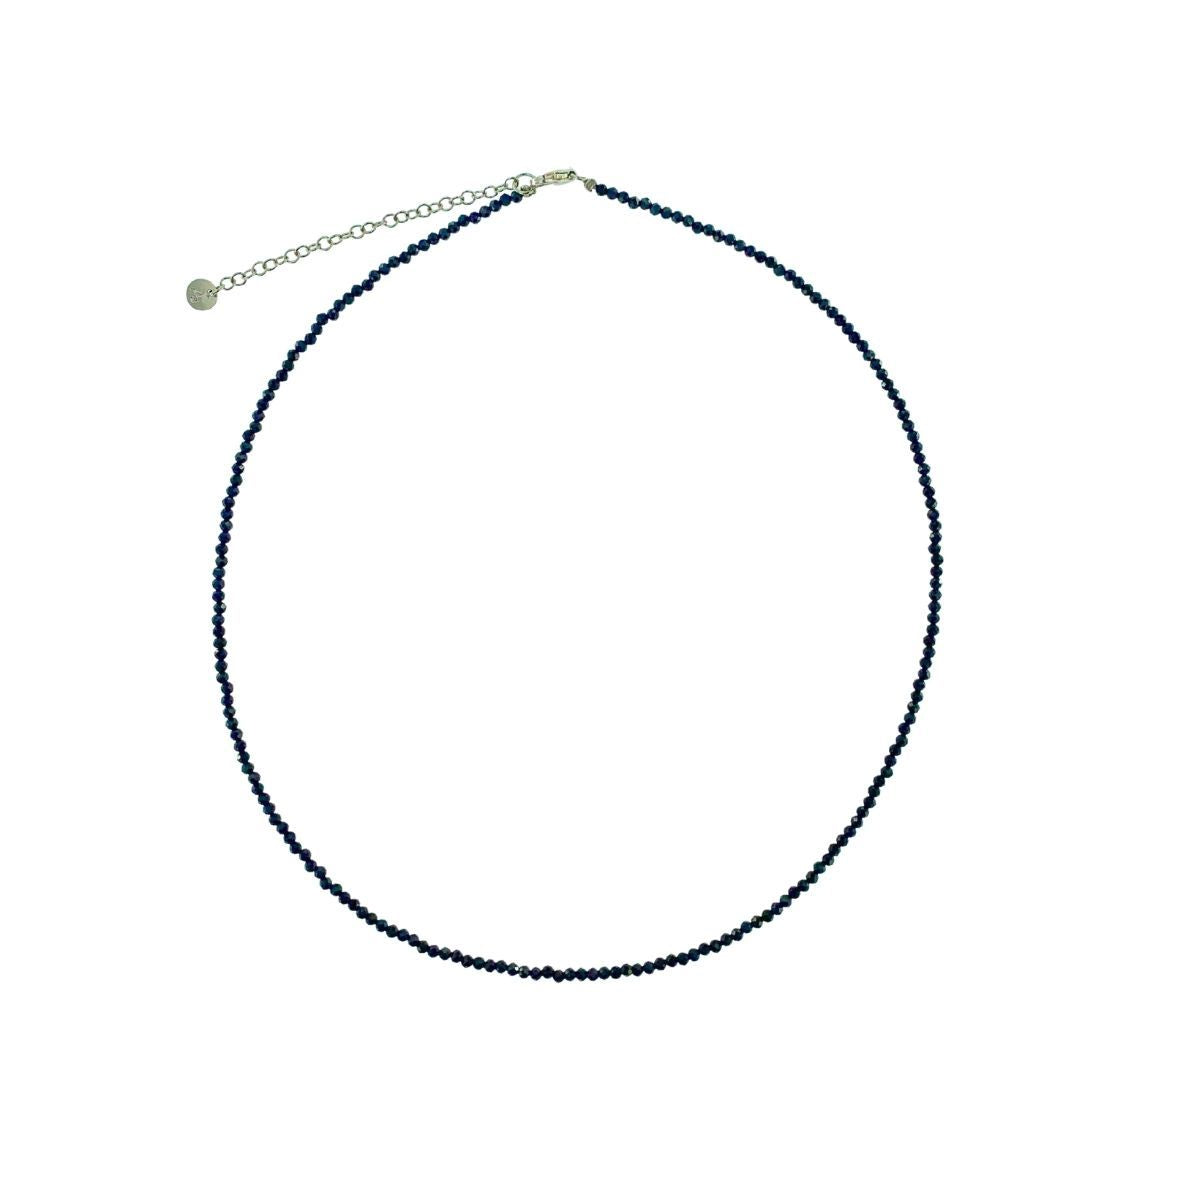 BLUE SAPPHIRE NECKLACE WITH SILVER CLASP